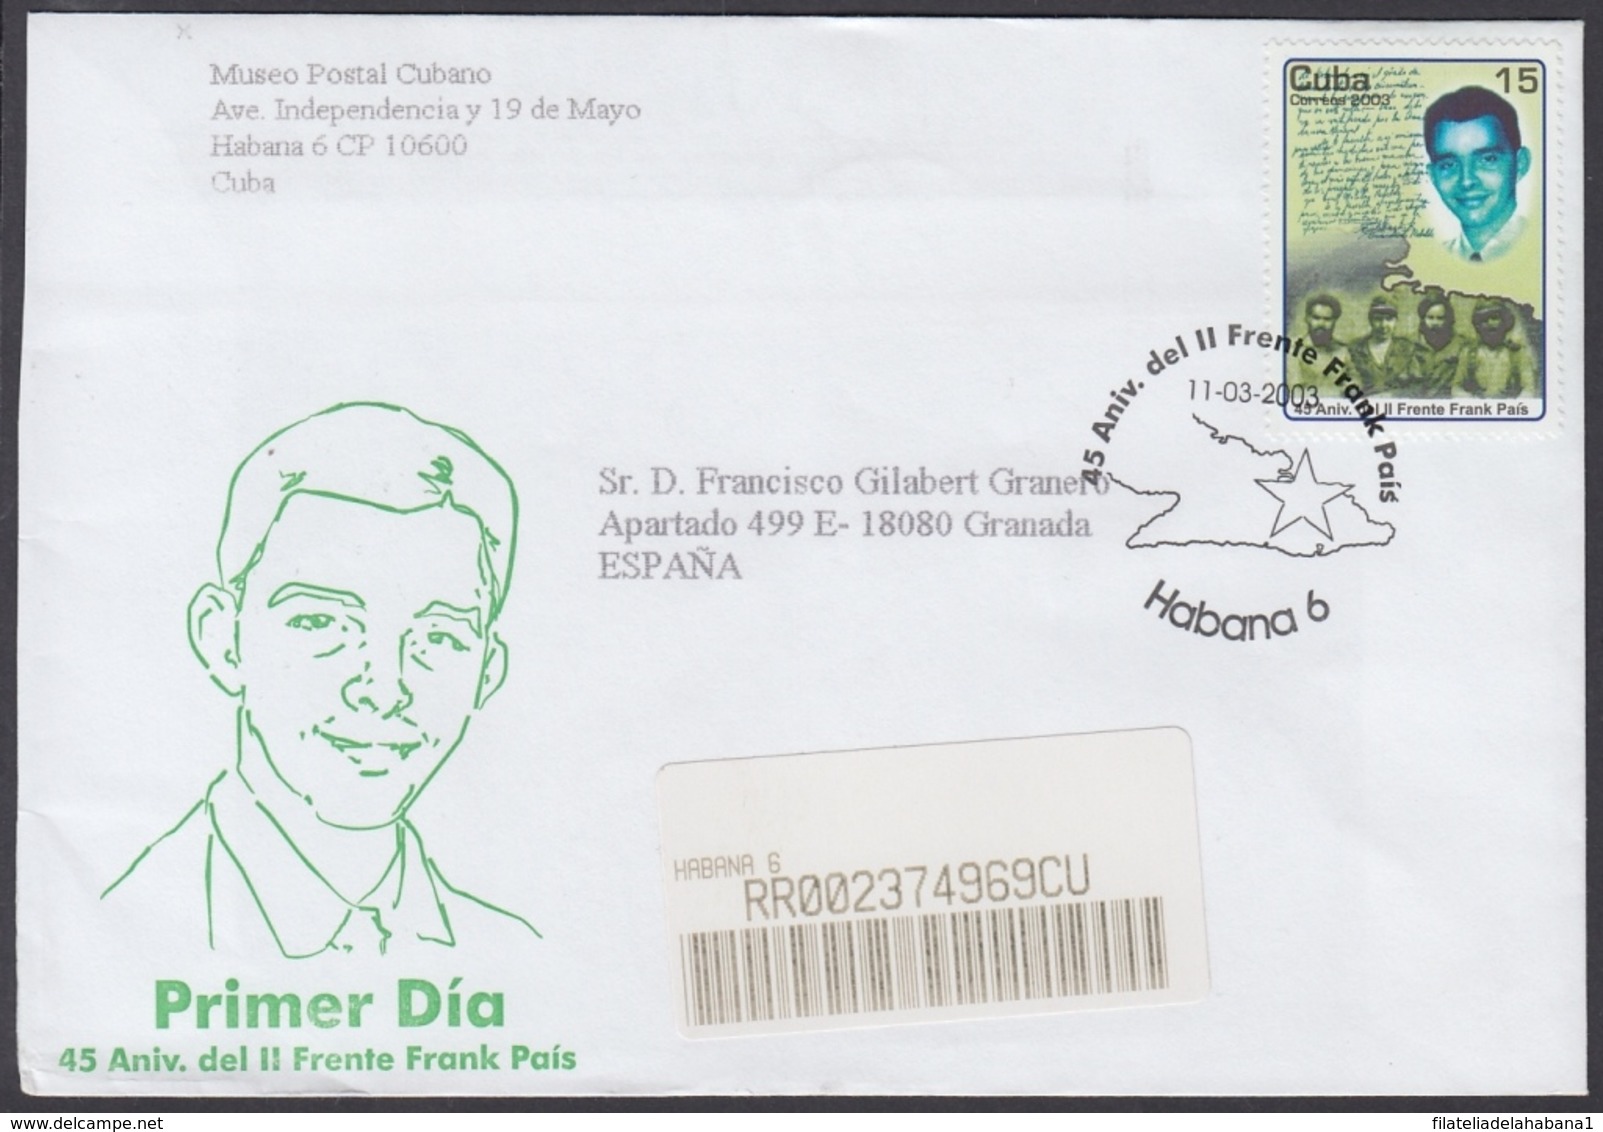 2003-FDC-59 CUBA FDC 2003. REGISTERED COVER TO SPAIN. 45 ANIV DEL II FRENTE FRANK PAIS. - FDC